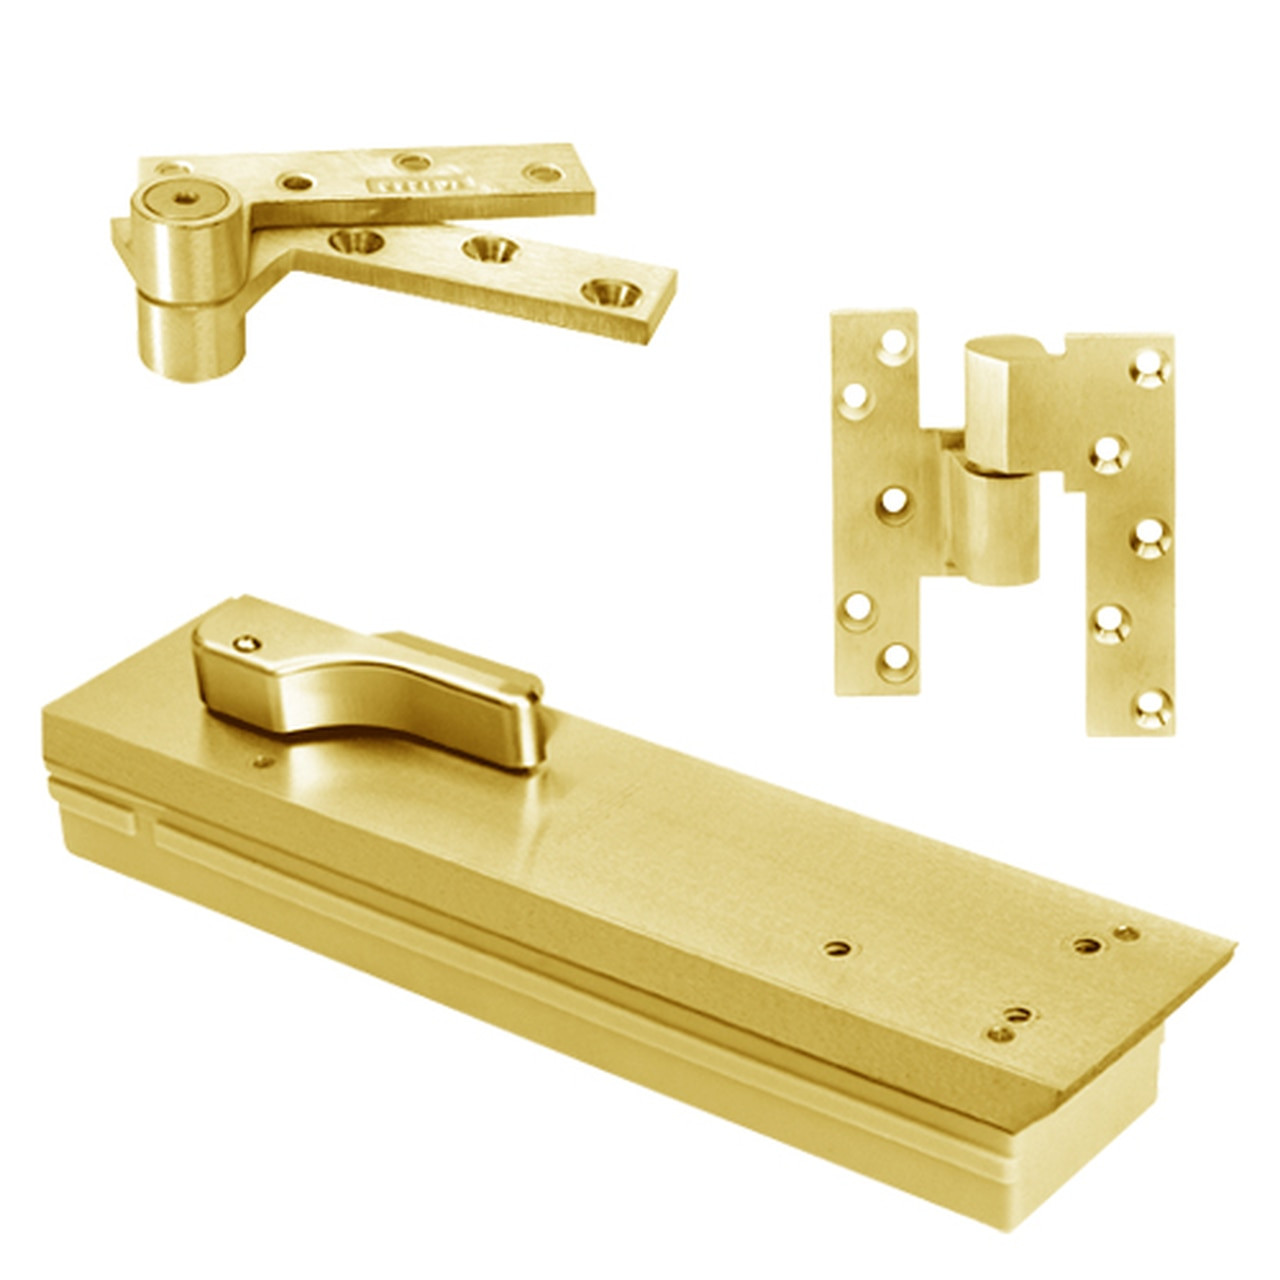 FQ5105NBC-LFP-LCC-LH-605 Rixson Q51 Series Fire Rated 3/4" Offset Hung Shallow Depth Floor Closers in Bright Brass Finish